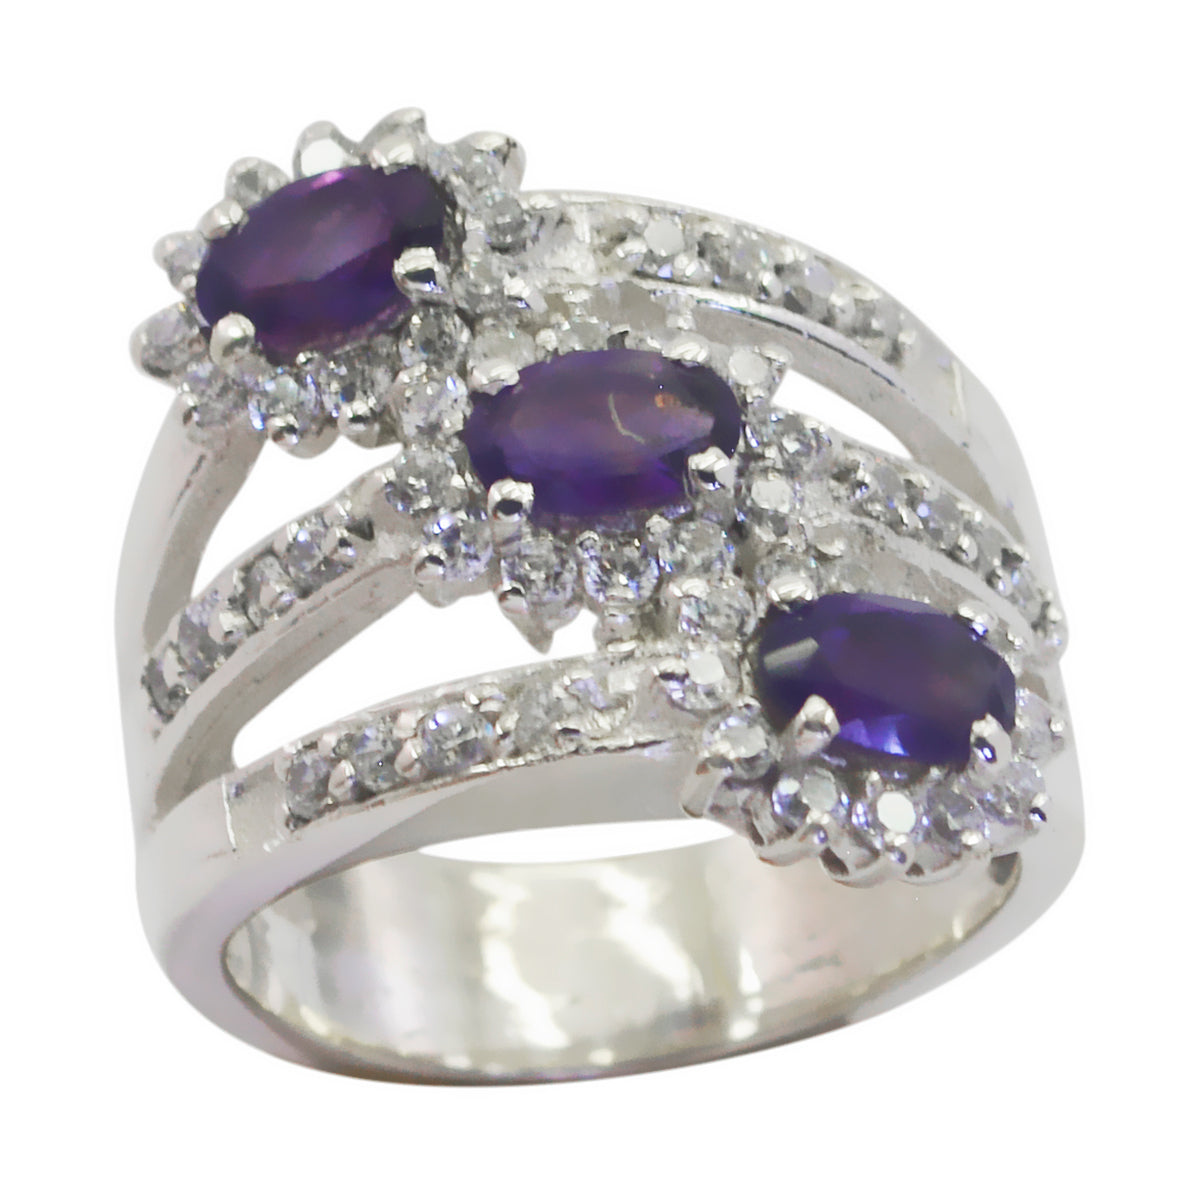 Fascinating Stone Amethyst Sterling Silver Ring Girls Jewelry Box